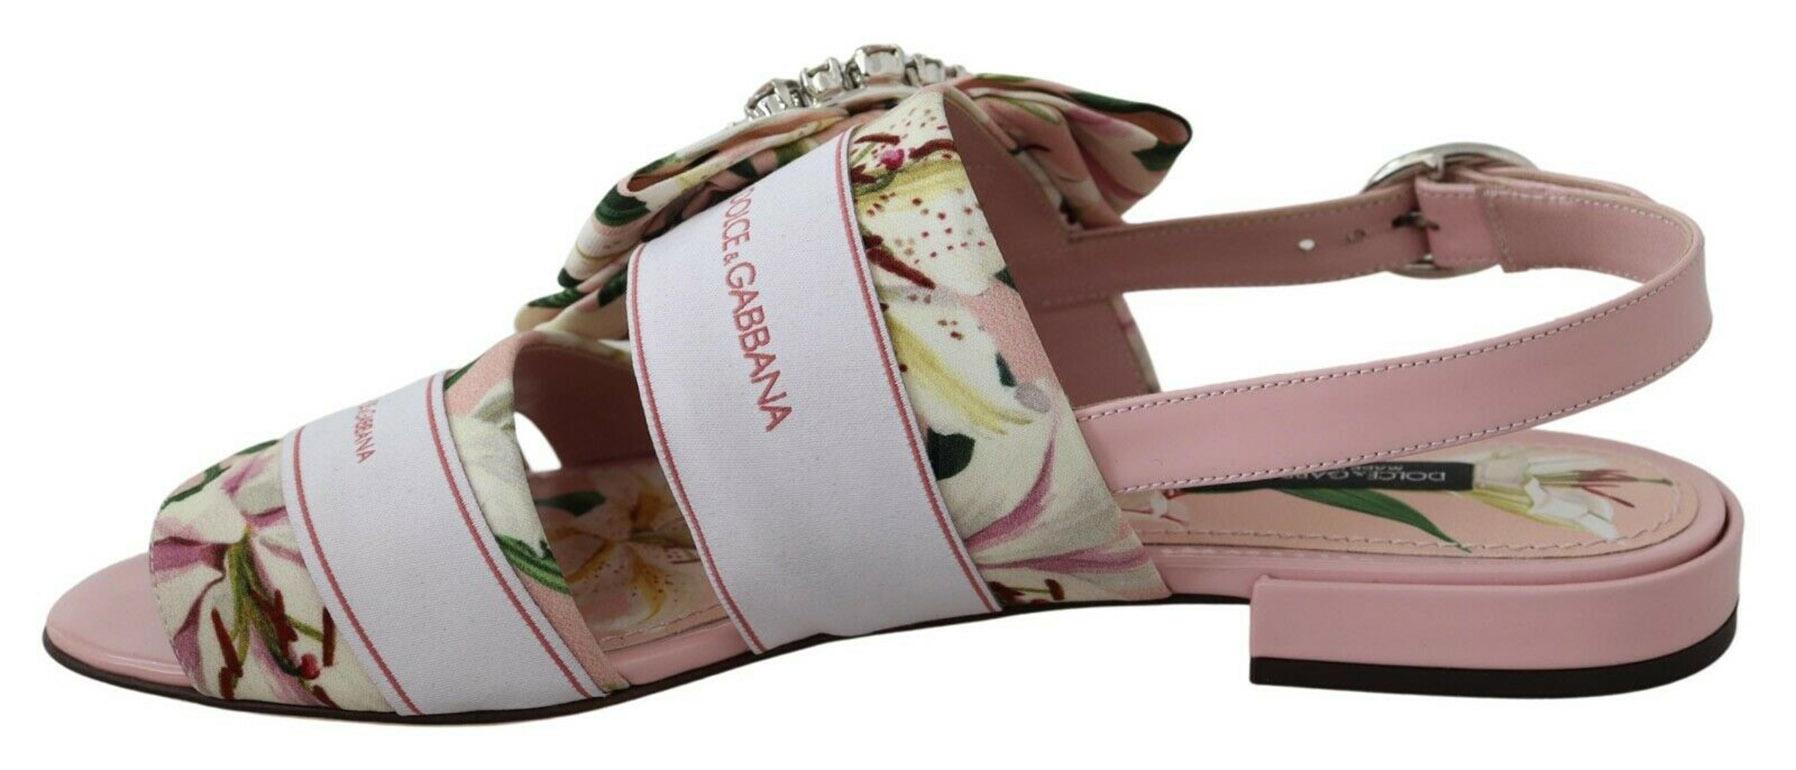 Gorgeous, brand new with tags 100% Authentic Dolce & Gabbana flats chose a dense lily print cady to create these light pink Bianca sandals. The romanticism of the pattern was supported by a bow, gathered with a crystal buckle.

Model: Sandals